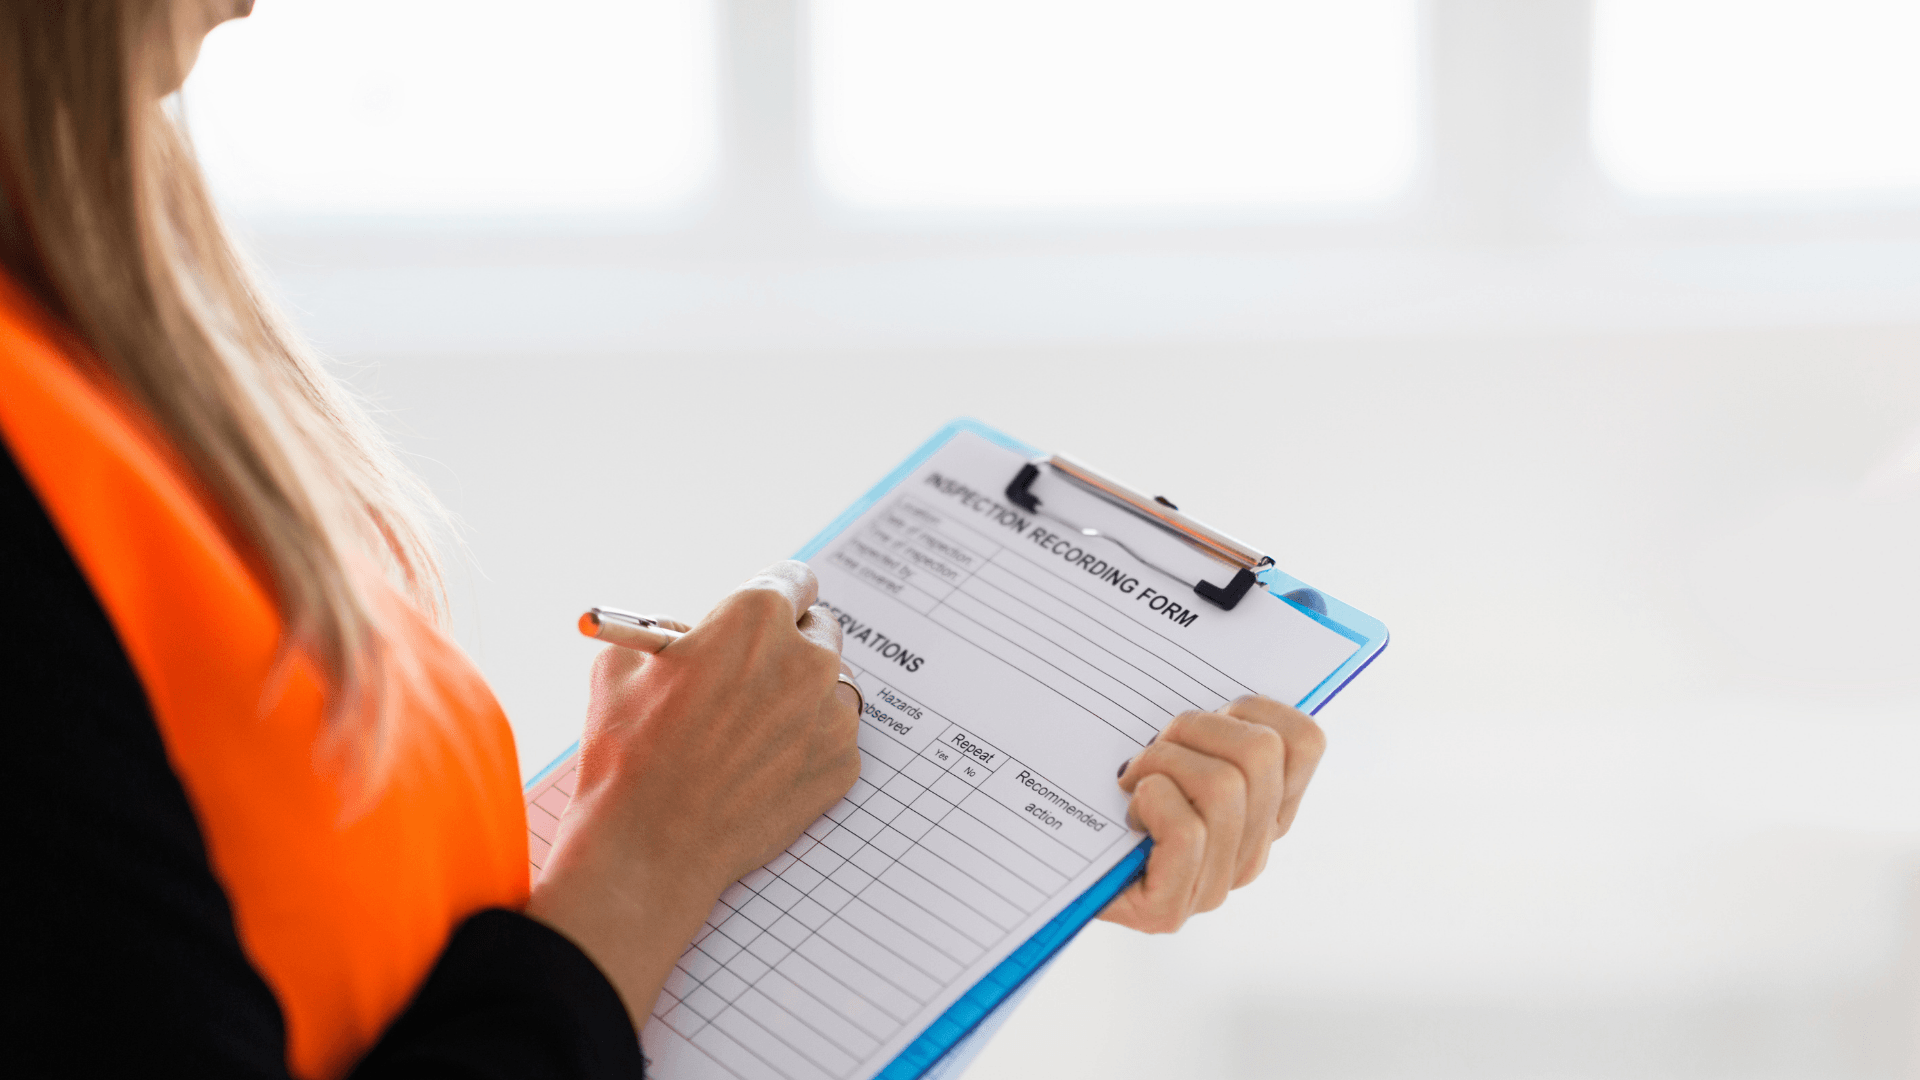 Tenant in high visibility vest diligently fills out an inspection form, with a softly blurred, brightly lit background.